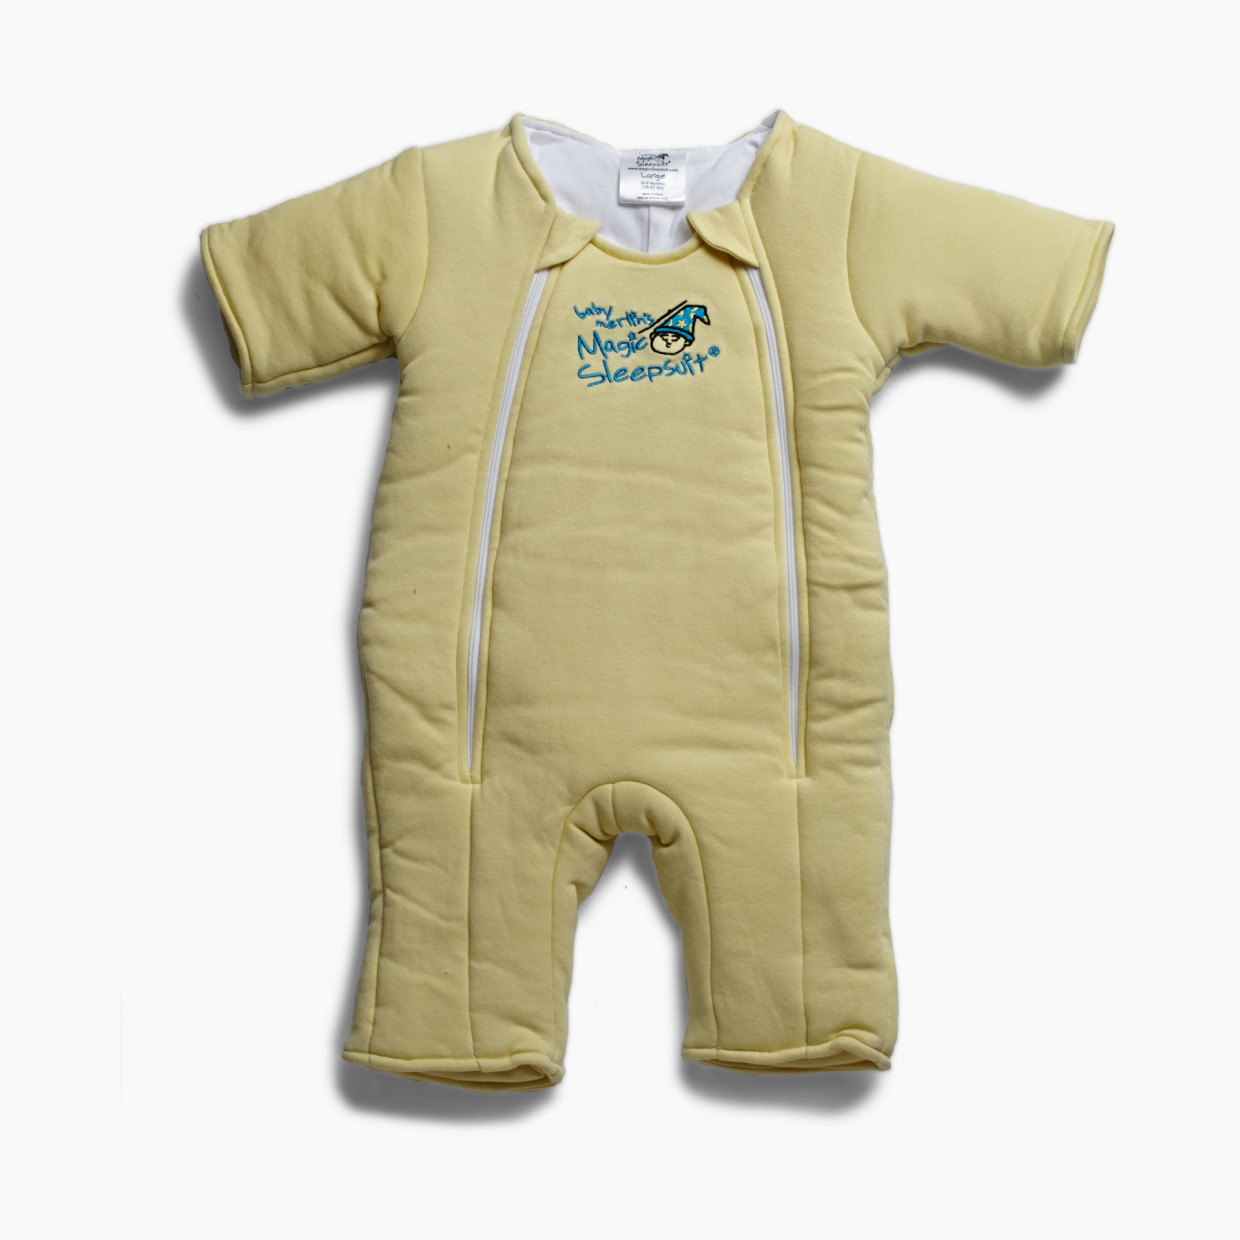 Baby Merlin's Magic Sleepsuit Cotton Swaddle Transition Product - Yellow, 3-6 Months.